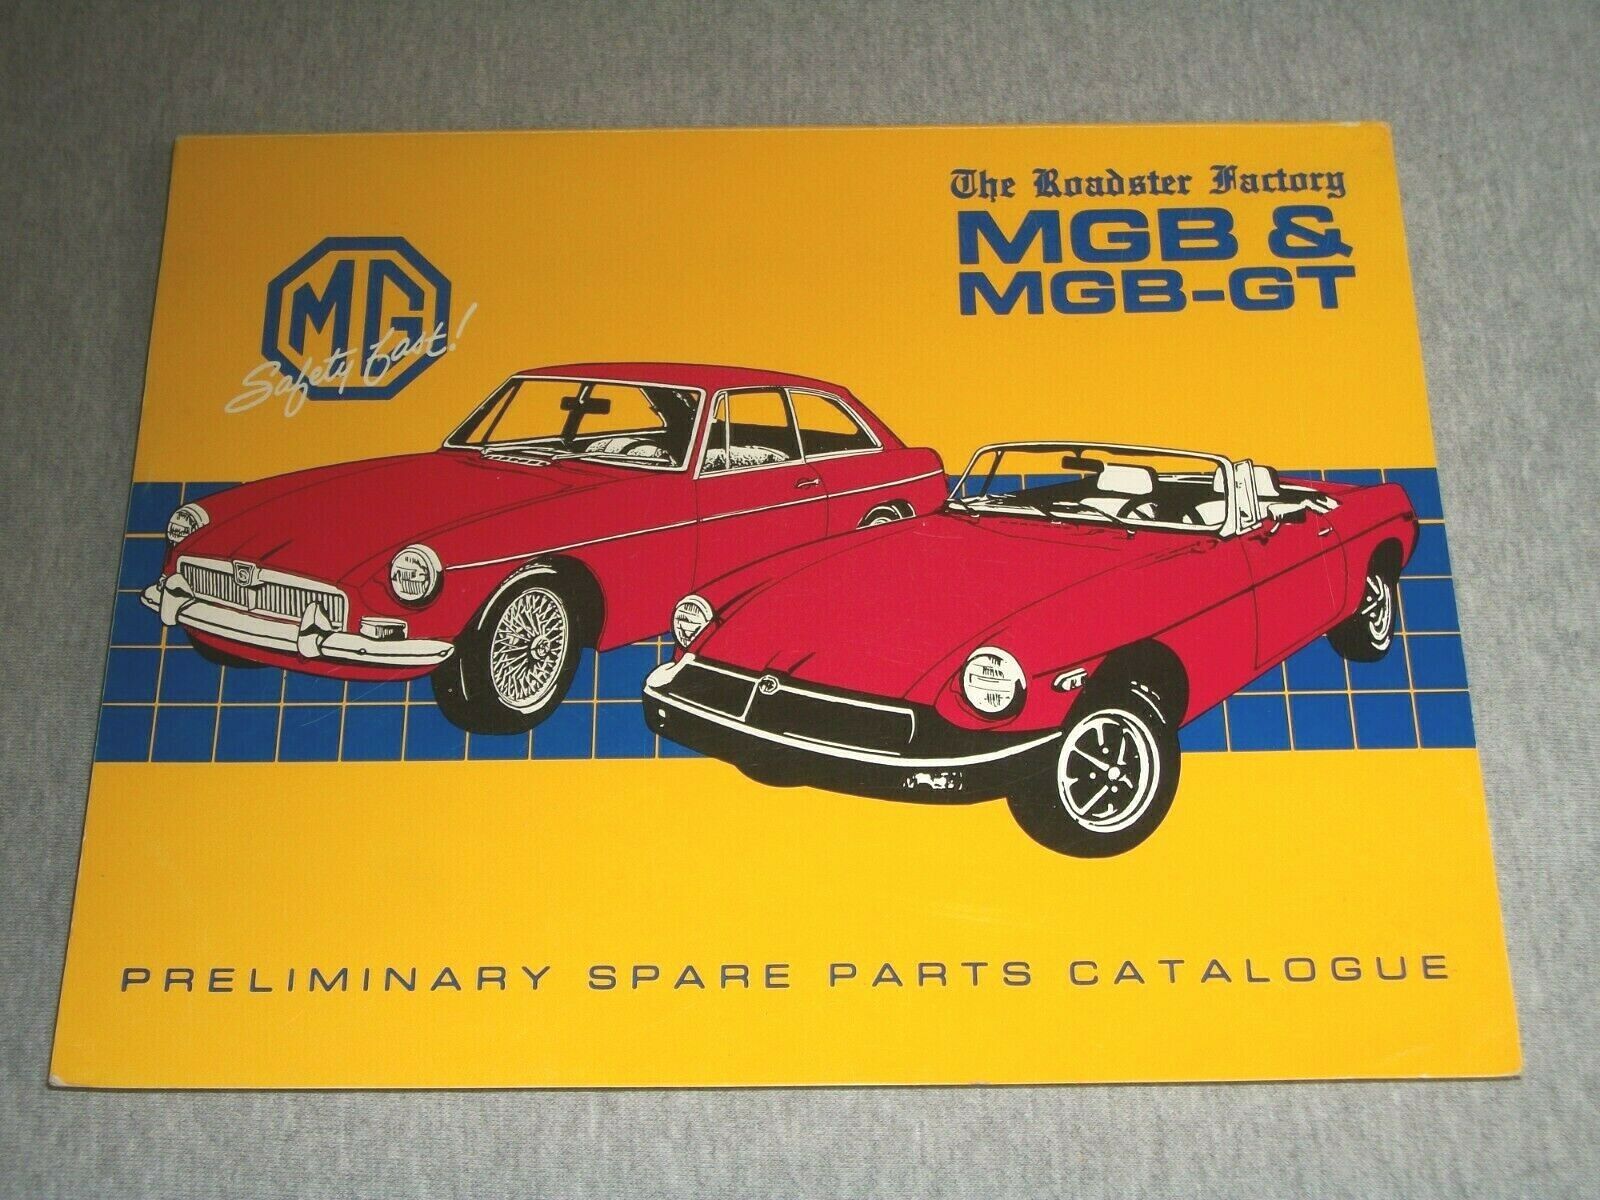 The Roadster Factory 1989 Preliminary Spare Parts Catalogue ~ Mgb & Mgb-gt